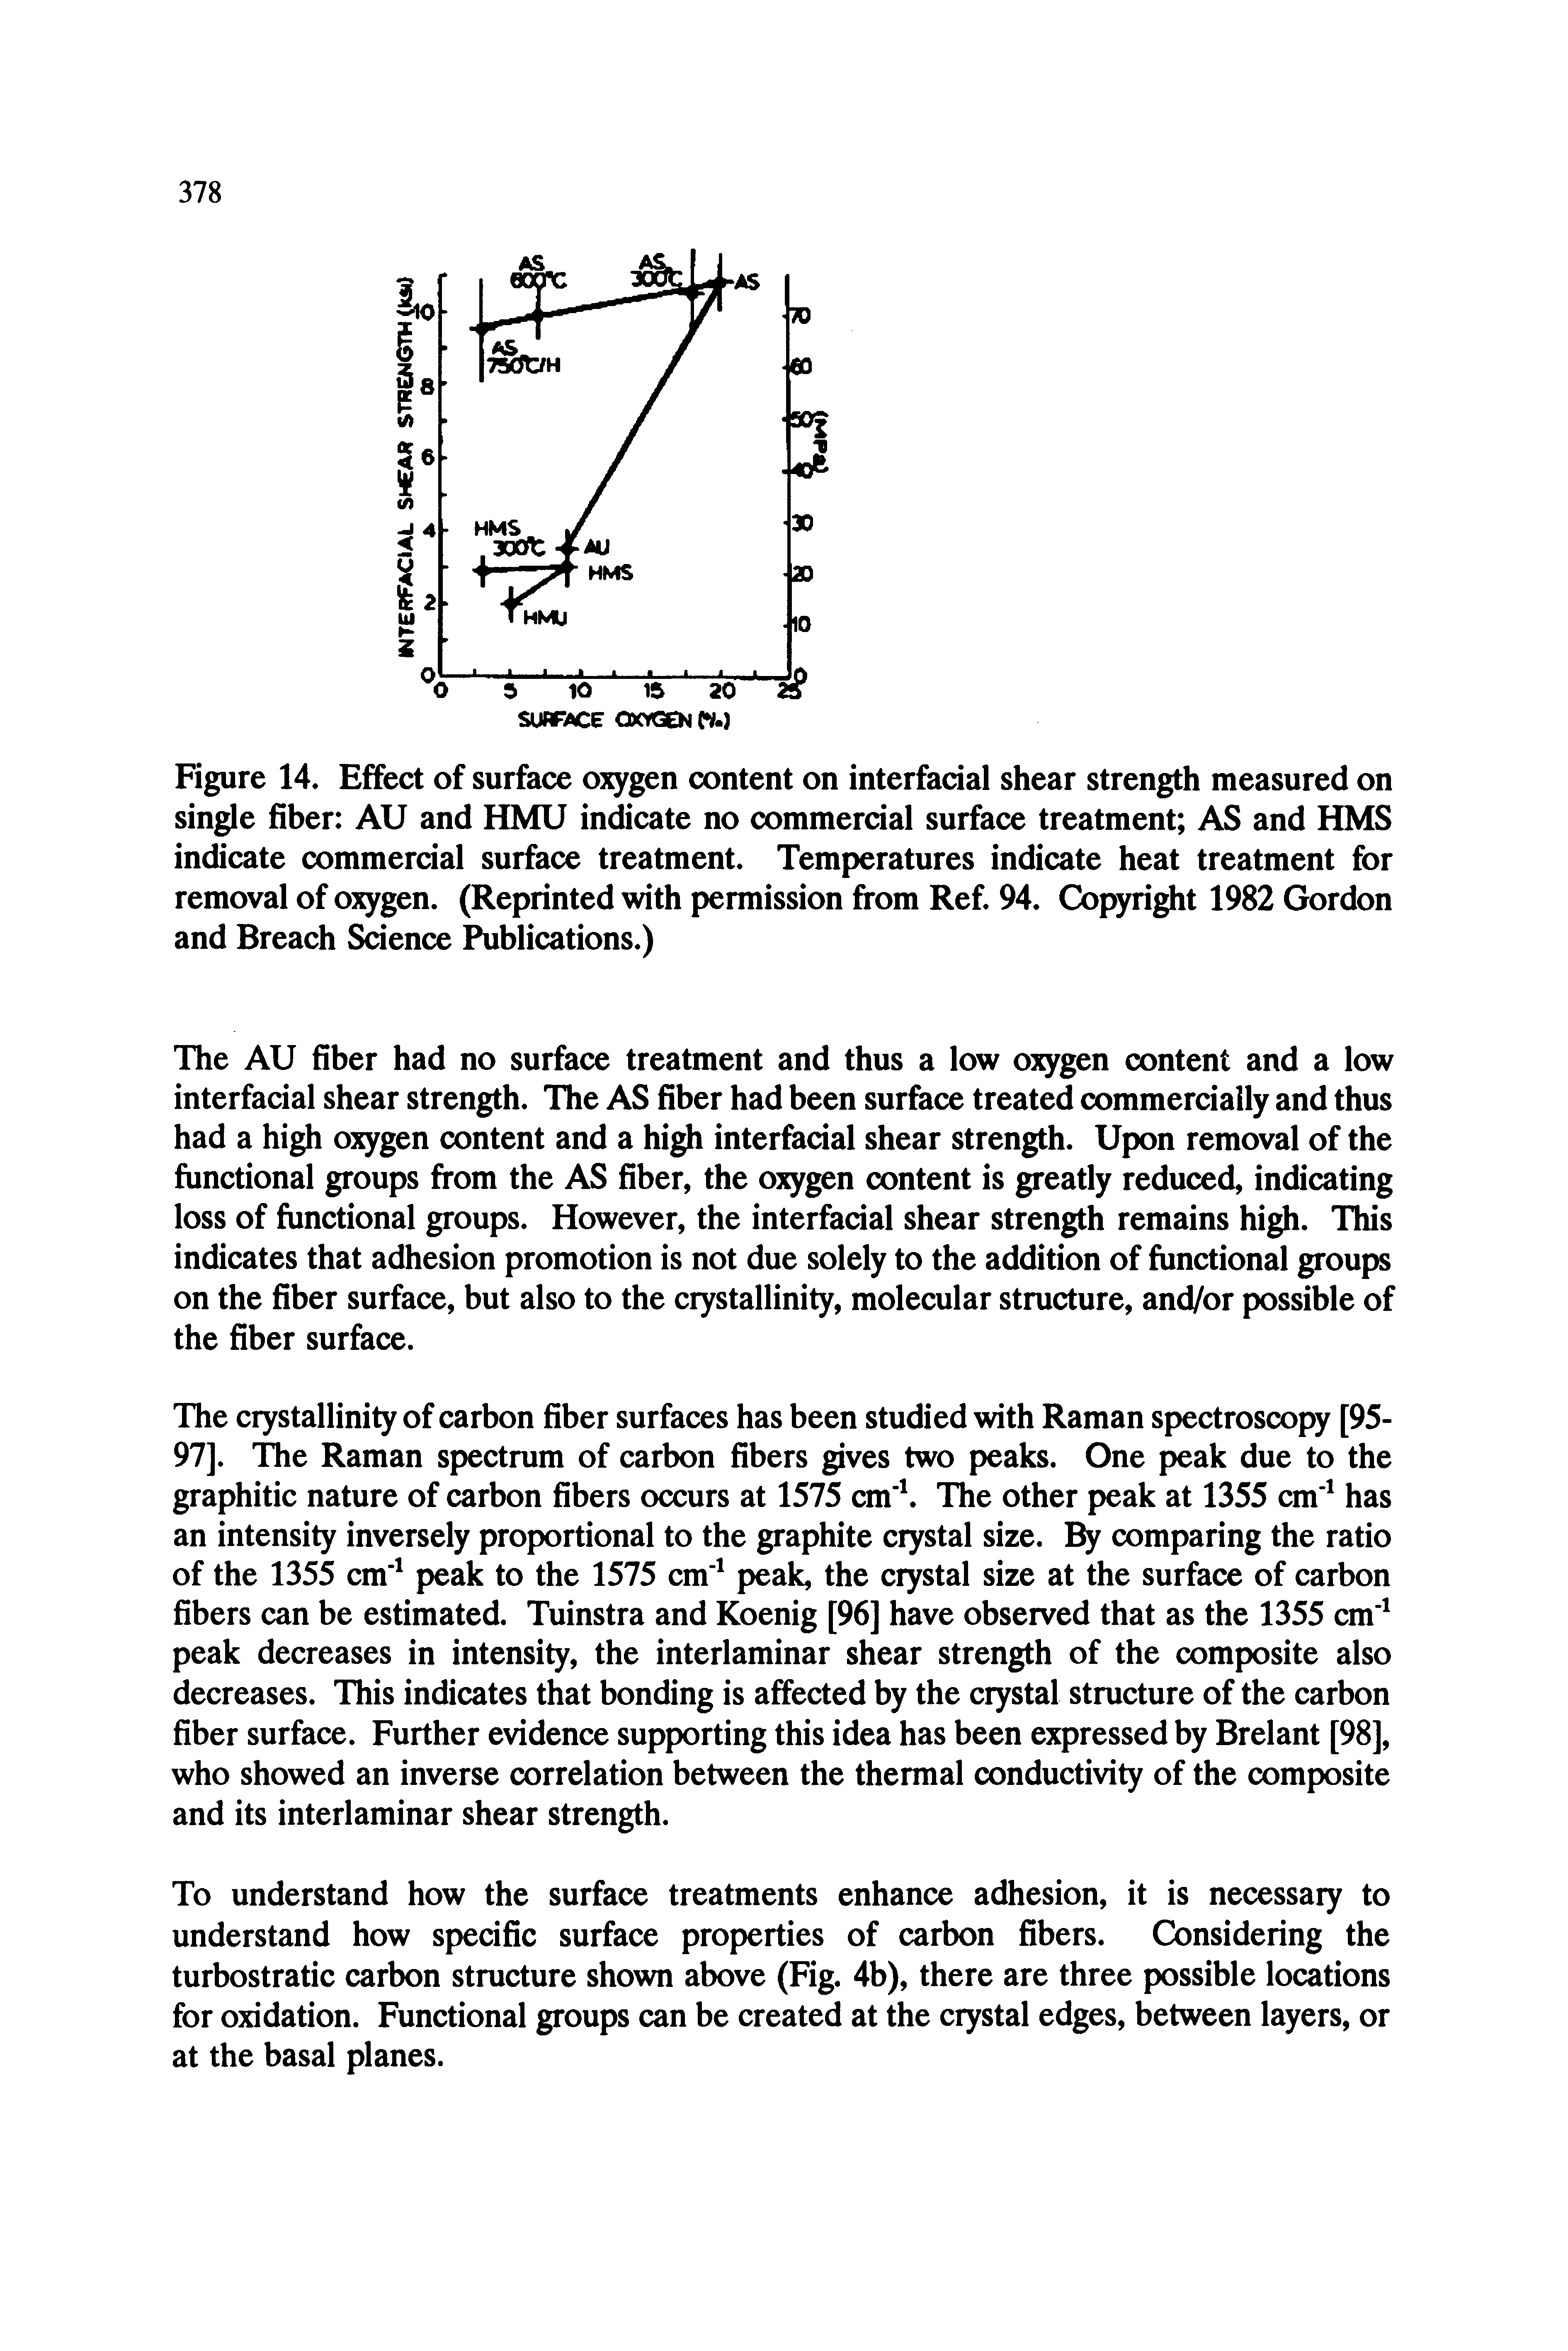 Figure 14. Effect of surface oxygen content on interfadal shear strength measured on single fiber AU and HMU indcate no commercial surface treatment AS and HMS indicate commercial surface treatment. Temperatures indicate heat treatment for removal of oxygen. (Reprinted with permission from Ref. 94. Copyright 1982 Gordon and Breach Sdence Publications.)...